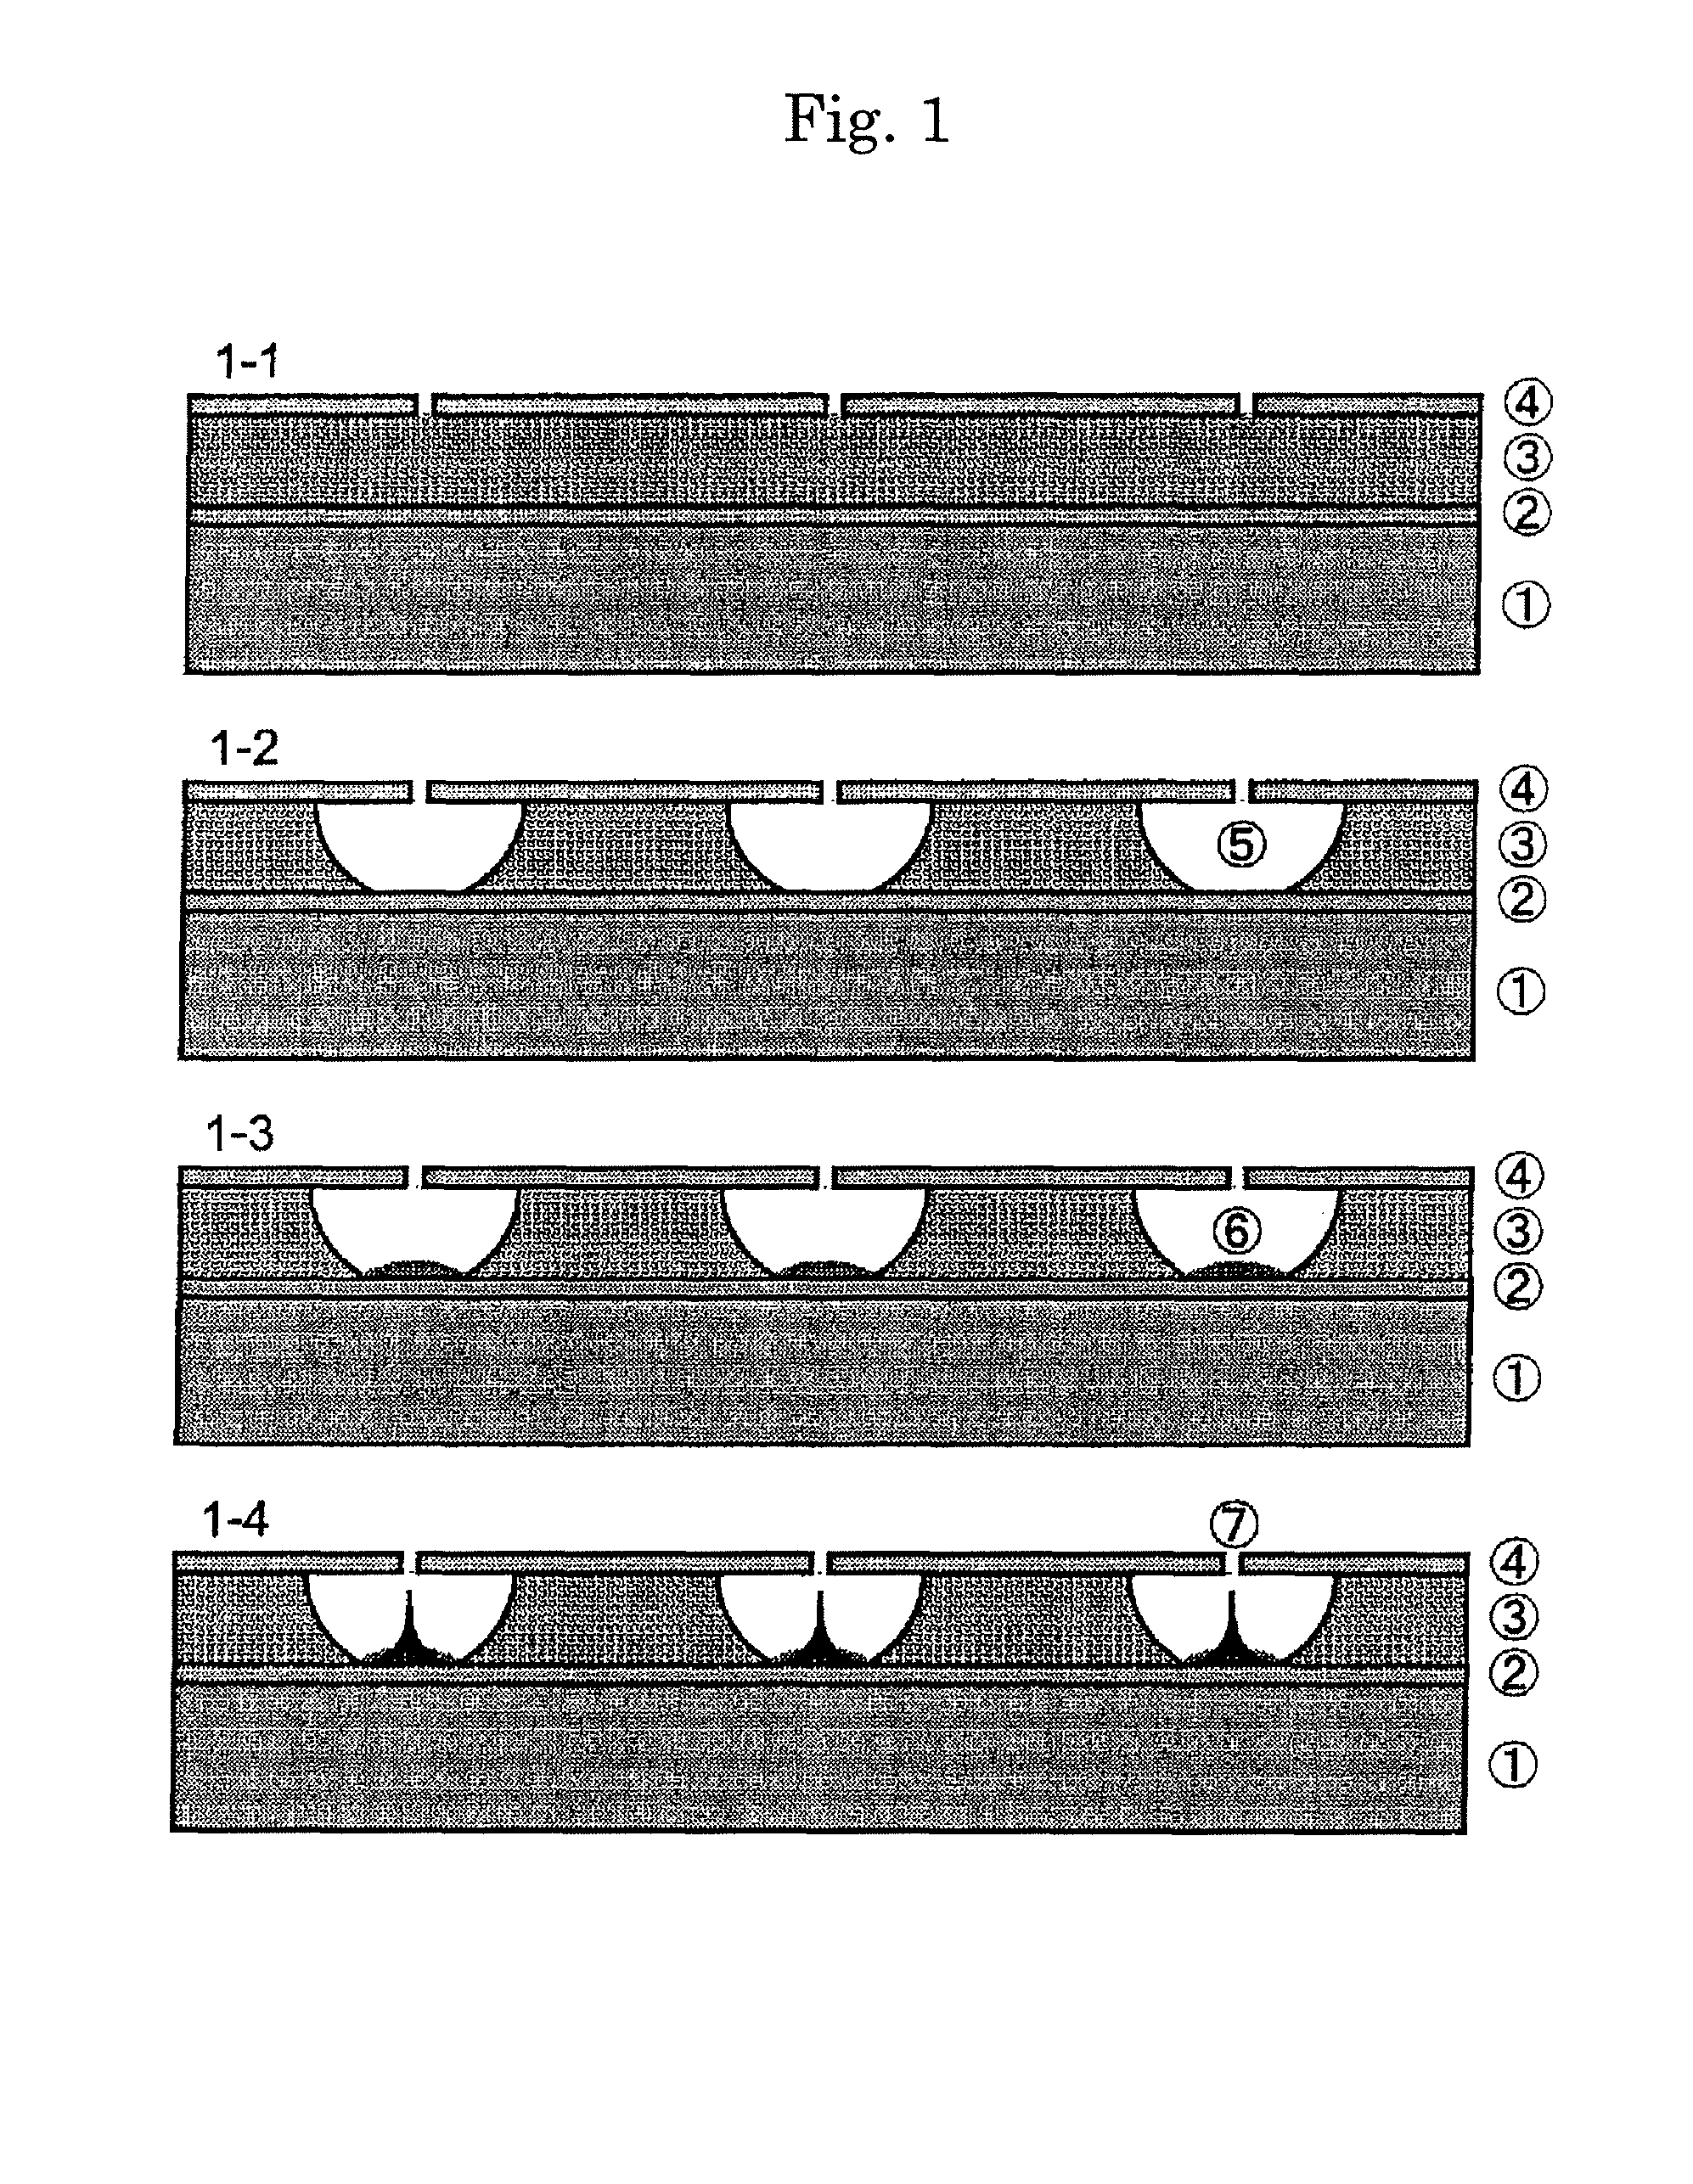 Carbon nanotube device and process for producing the same